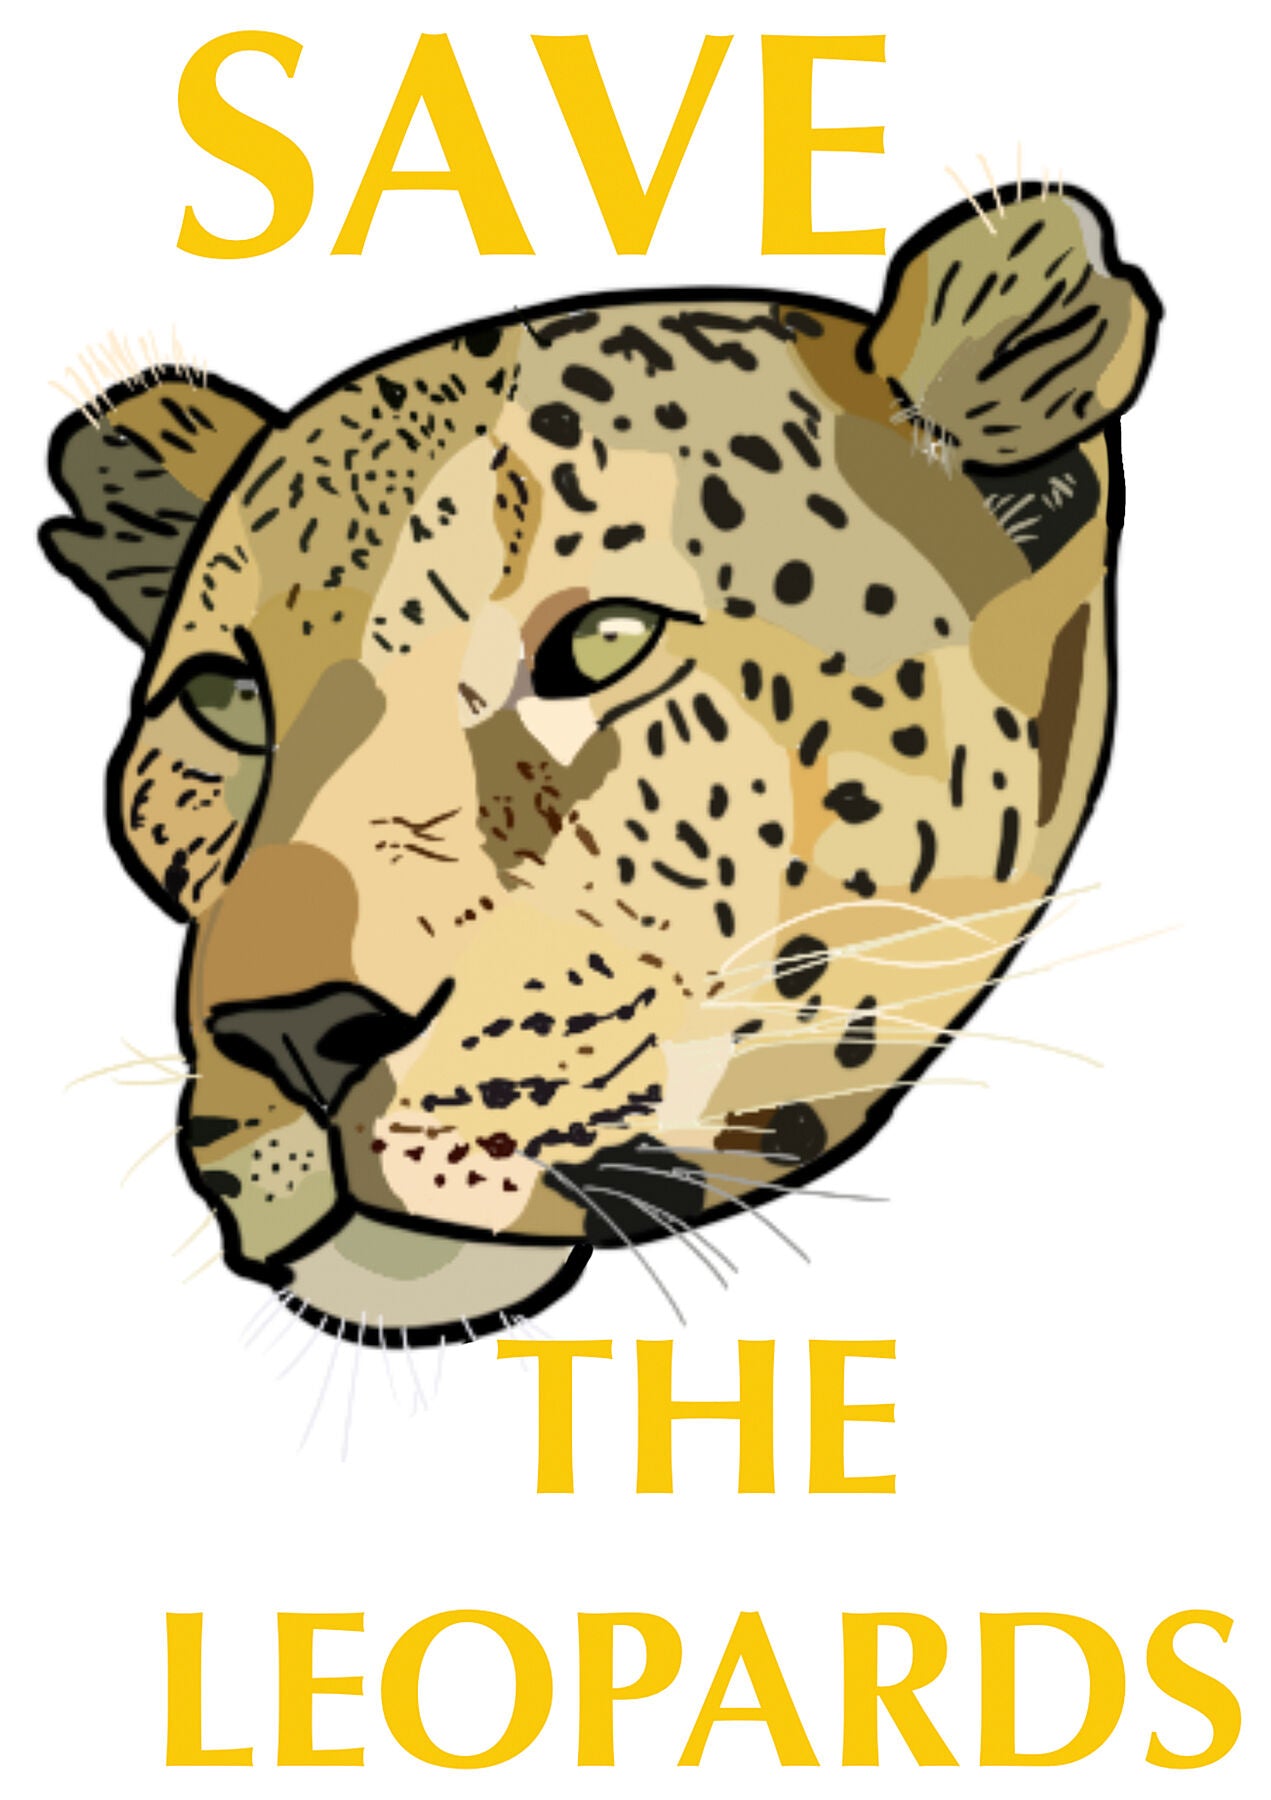 Leopard's head between text saying Save The Leopards